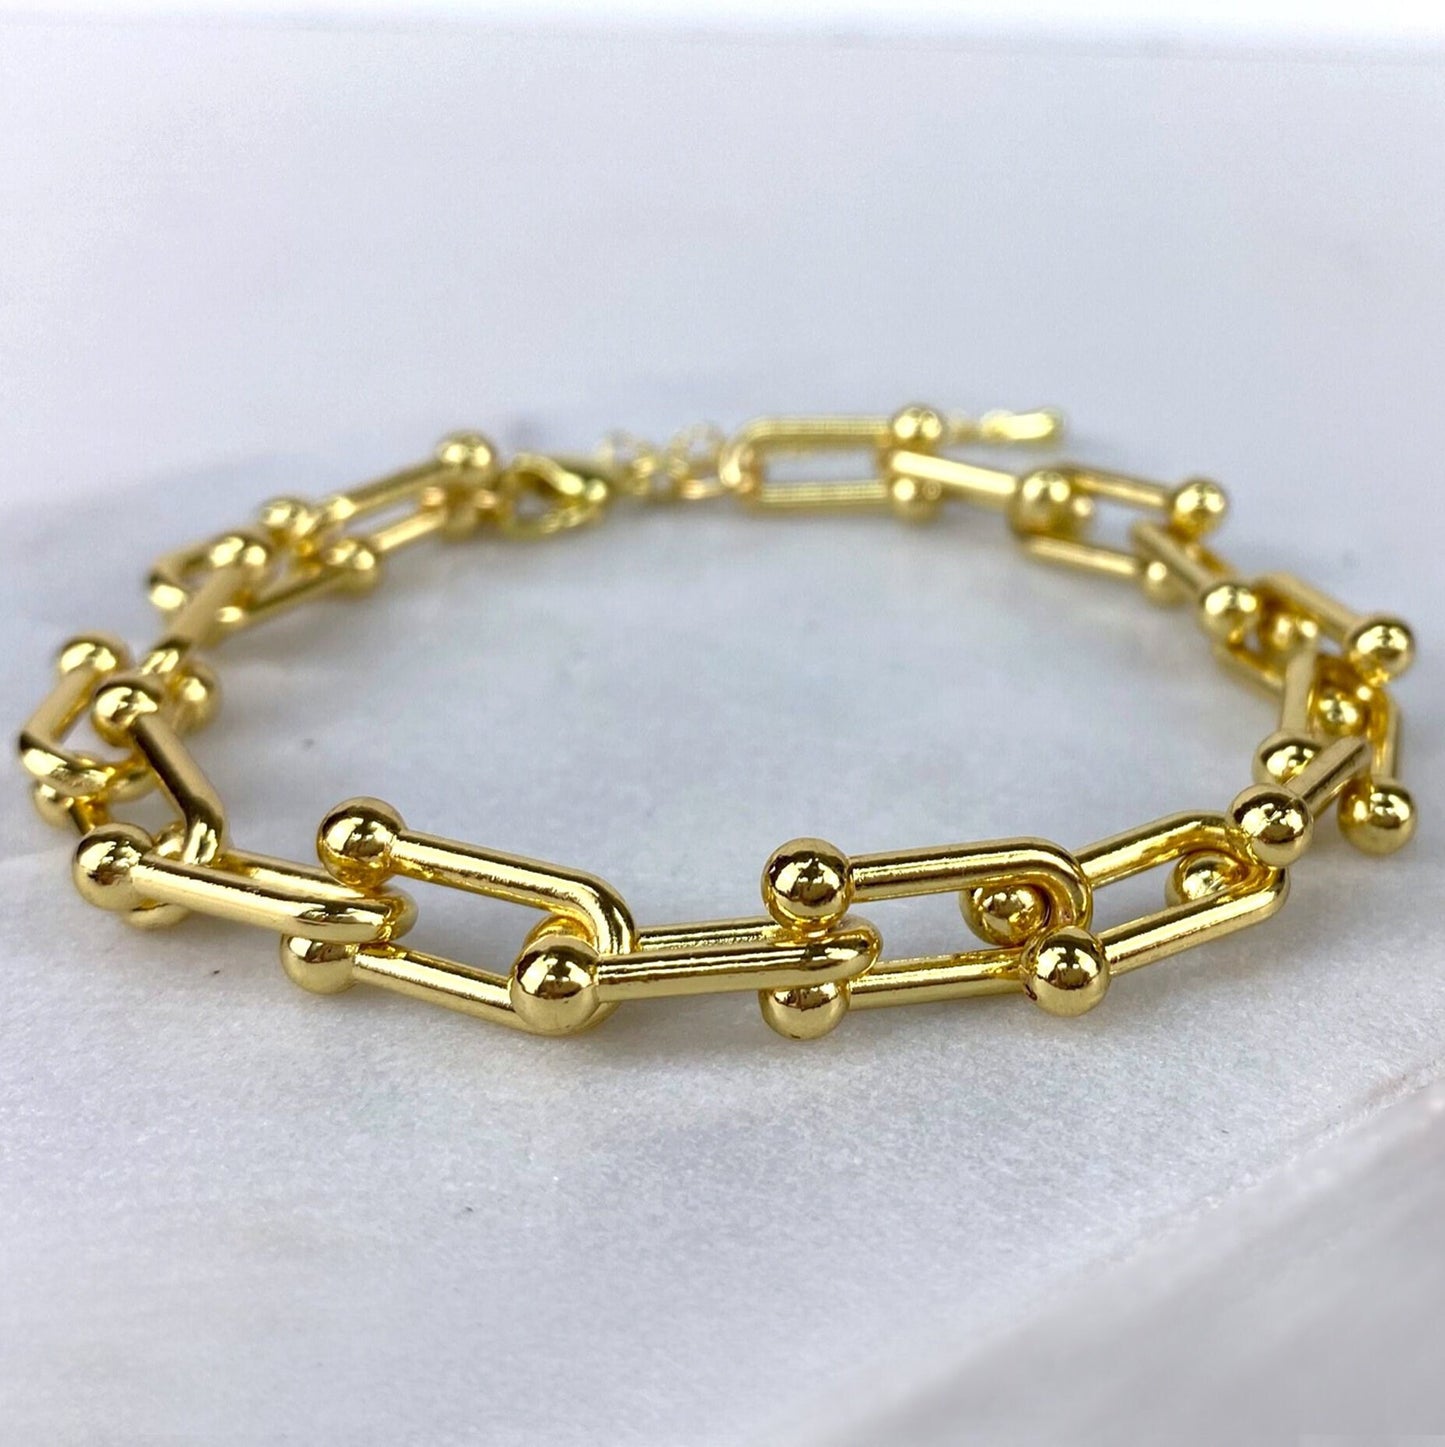 18k Gold Filled U Link Necklace 16 or 18 inches, Bracelet 7 or 8 inches and Anklet 11 inches, Wholesale Jewelry Supplies